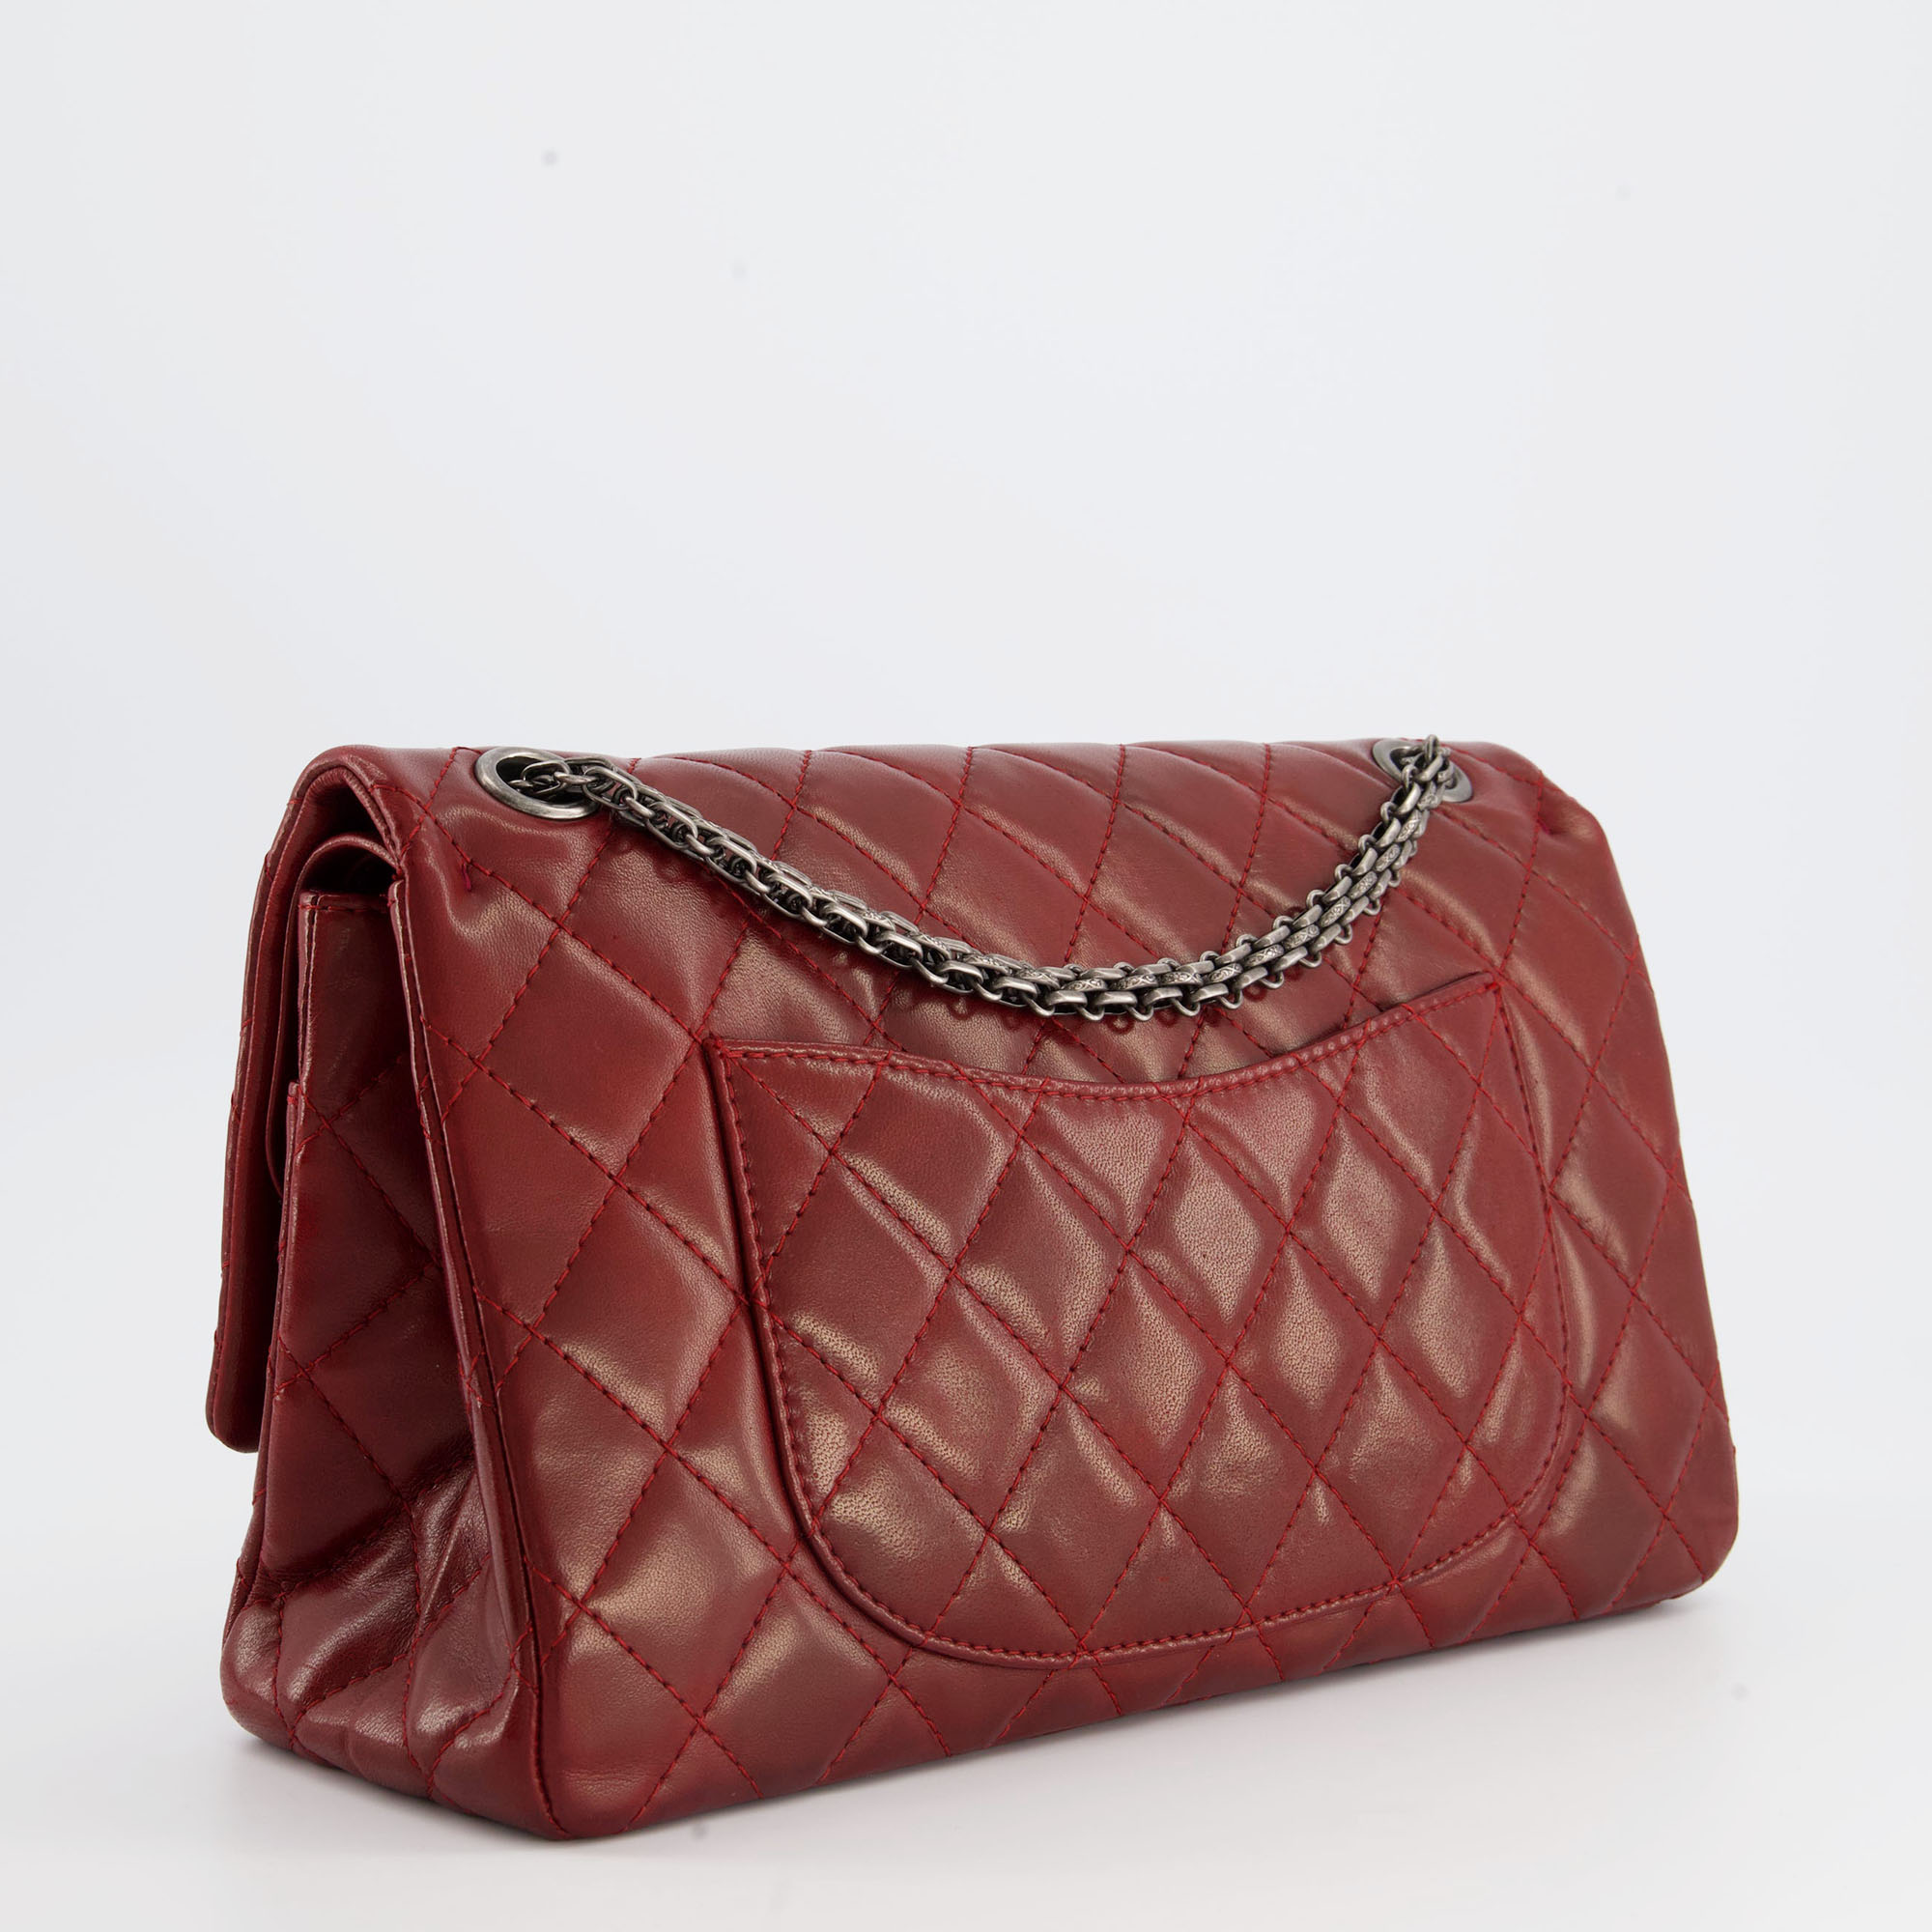 Chanel Deep Red Medium Reissue Bag In Lambskin Leather With Ruthenium Hardware